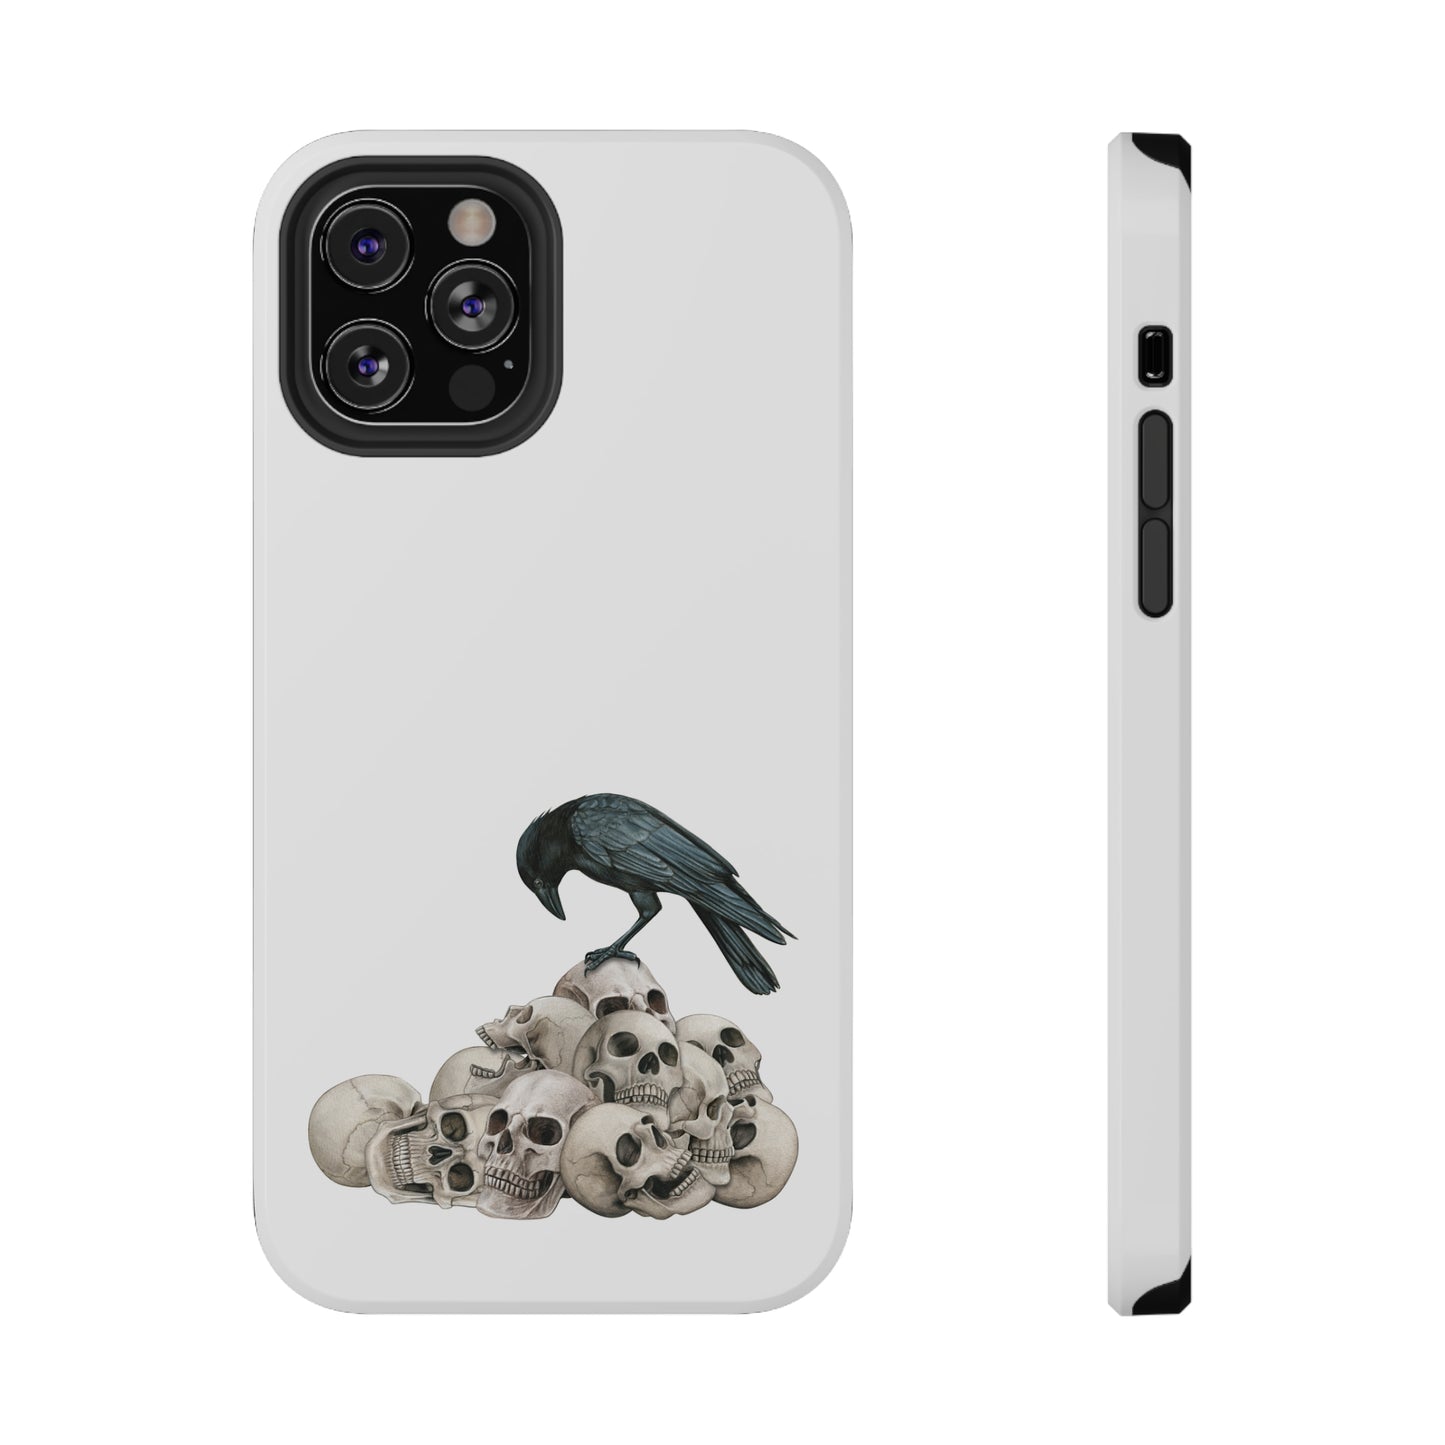 Crow On Skulls Impact-Resistant Cases for iPhones and Samsung Galaxy, Choose your model type, Glossy or Matte Finish